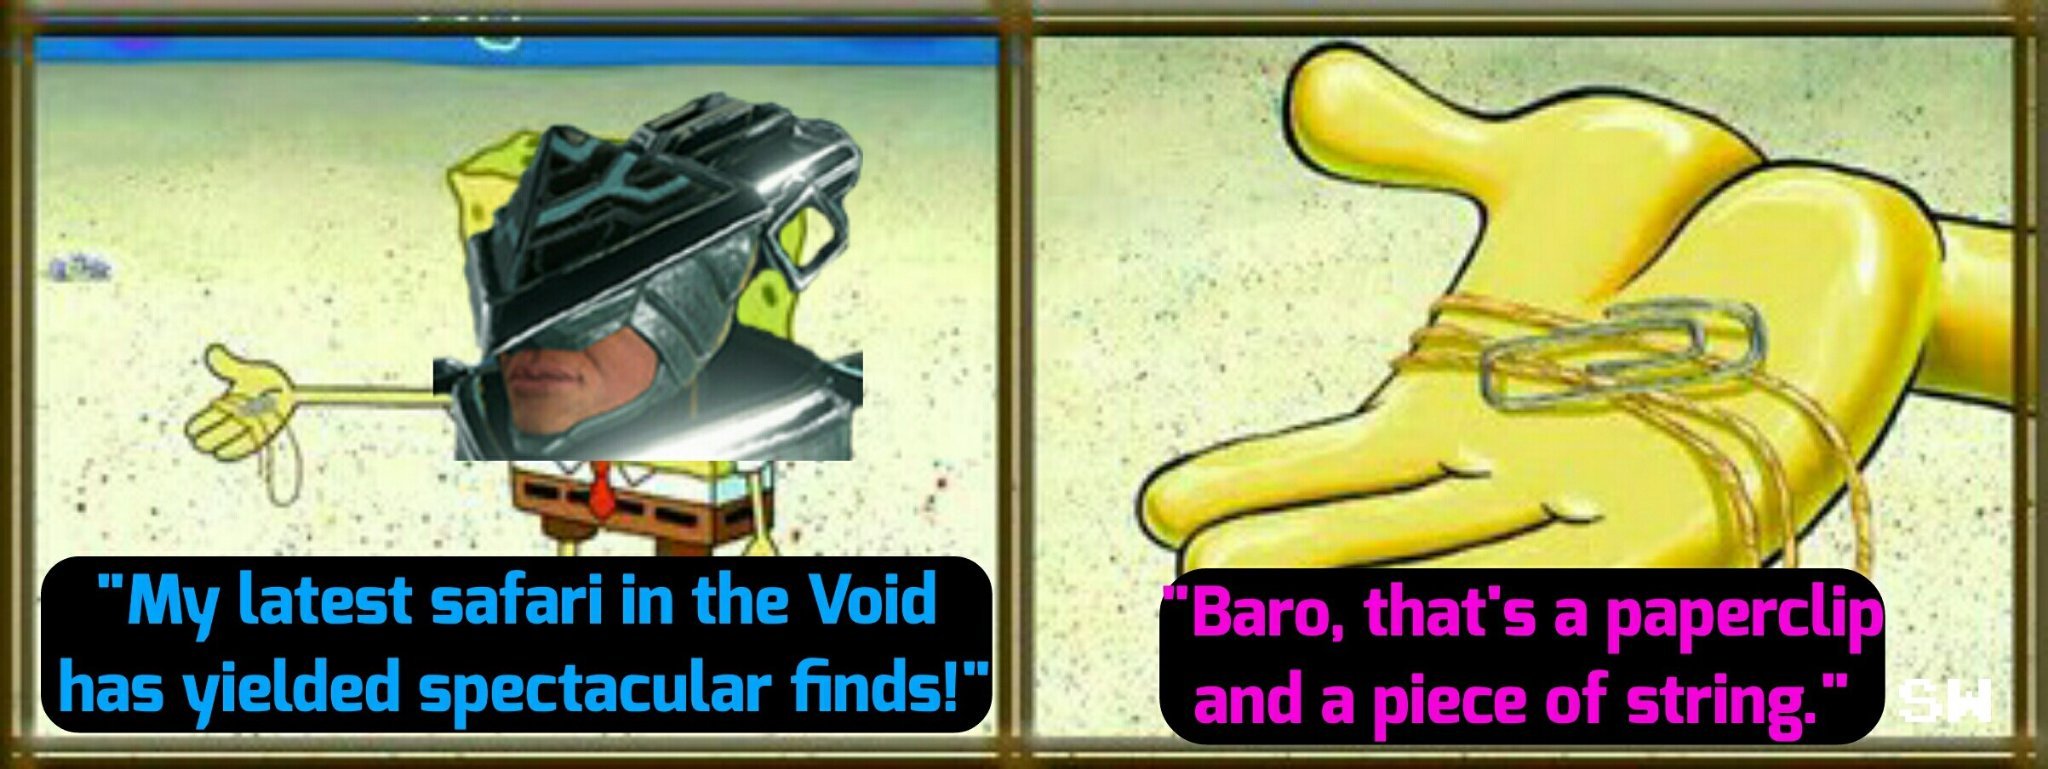 Baro why no new weapons - meme